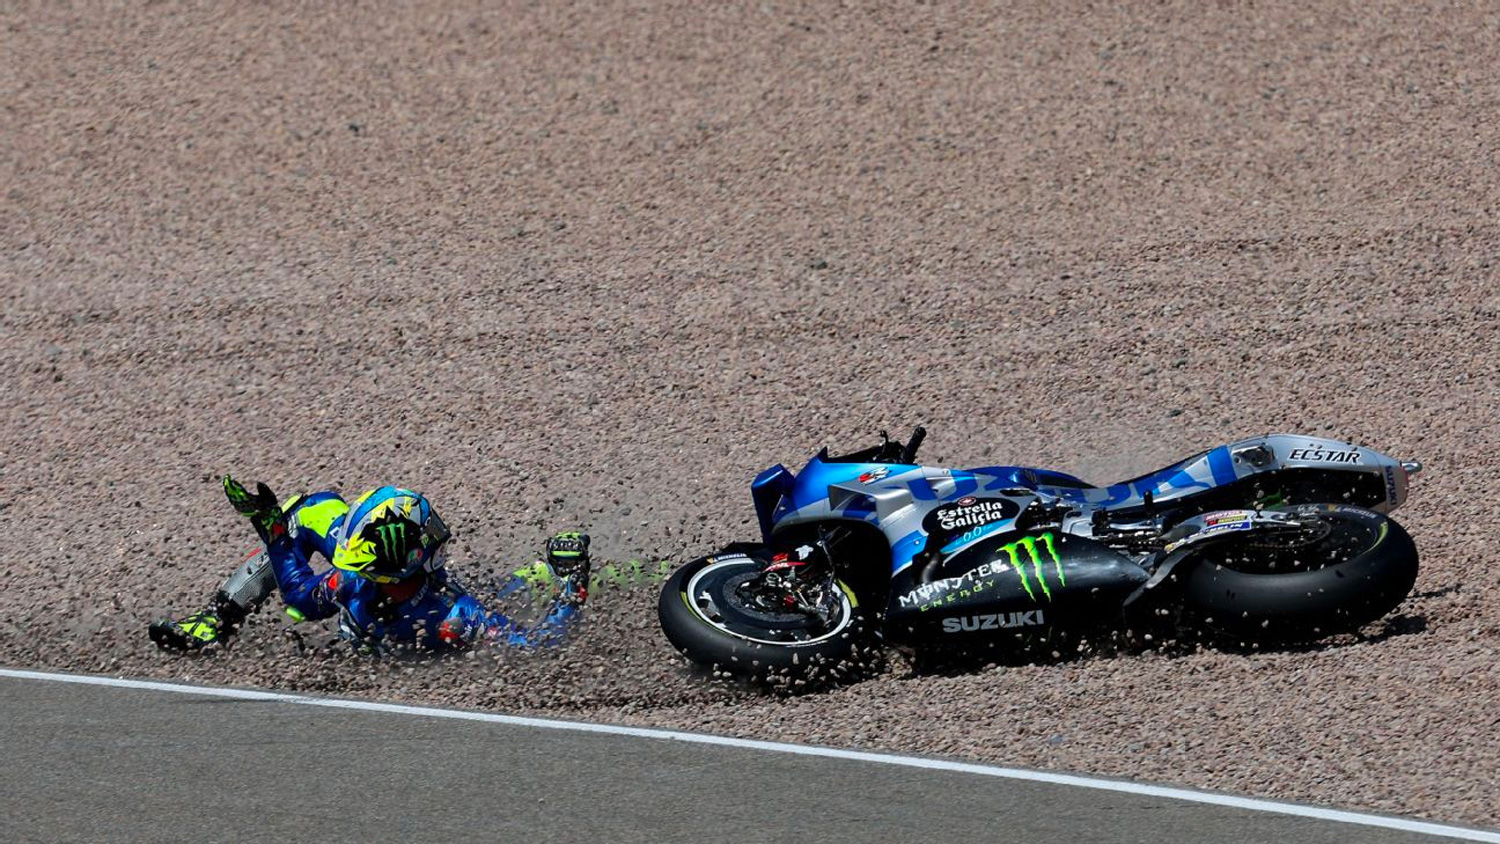 MotoGP rider comes off his motorcycle and slides into the gravel during a race